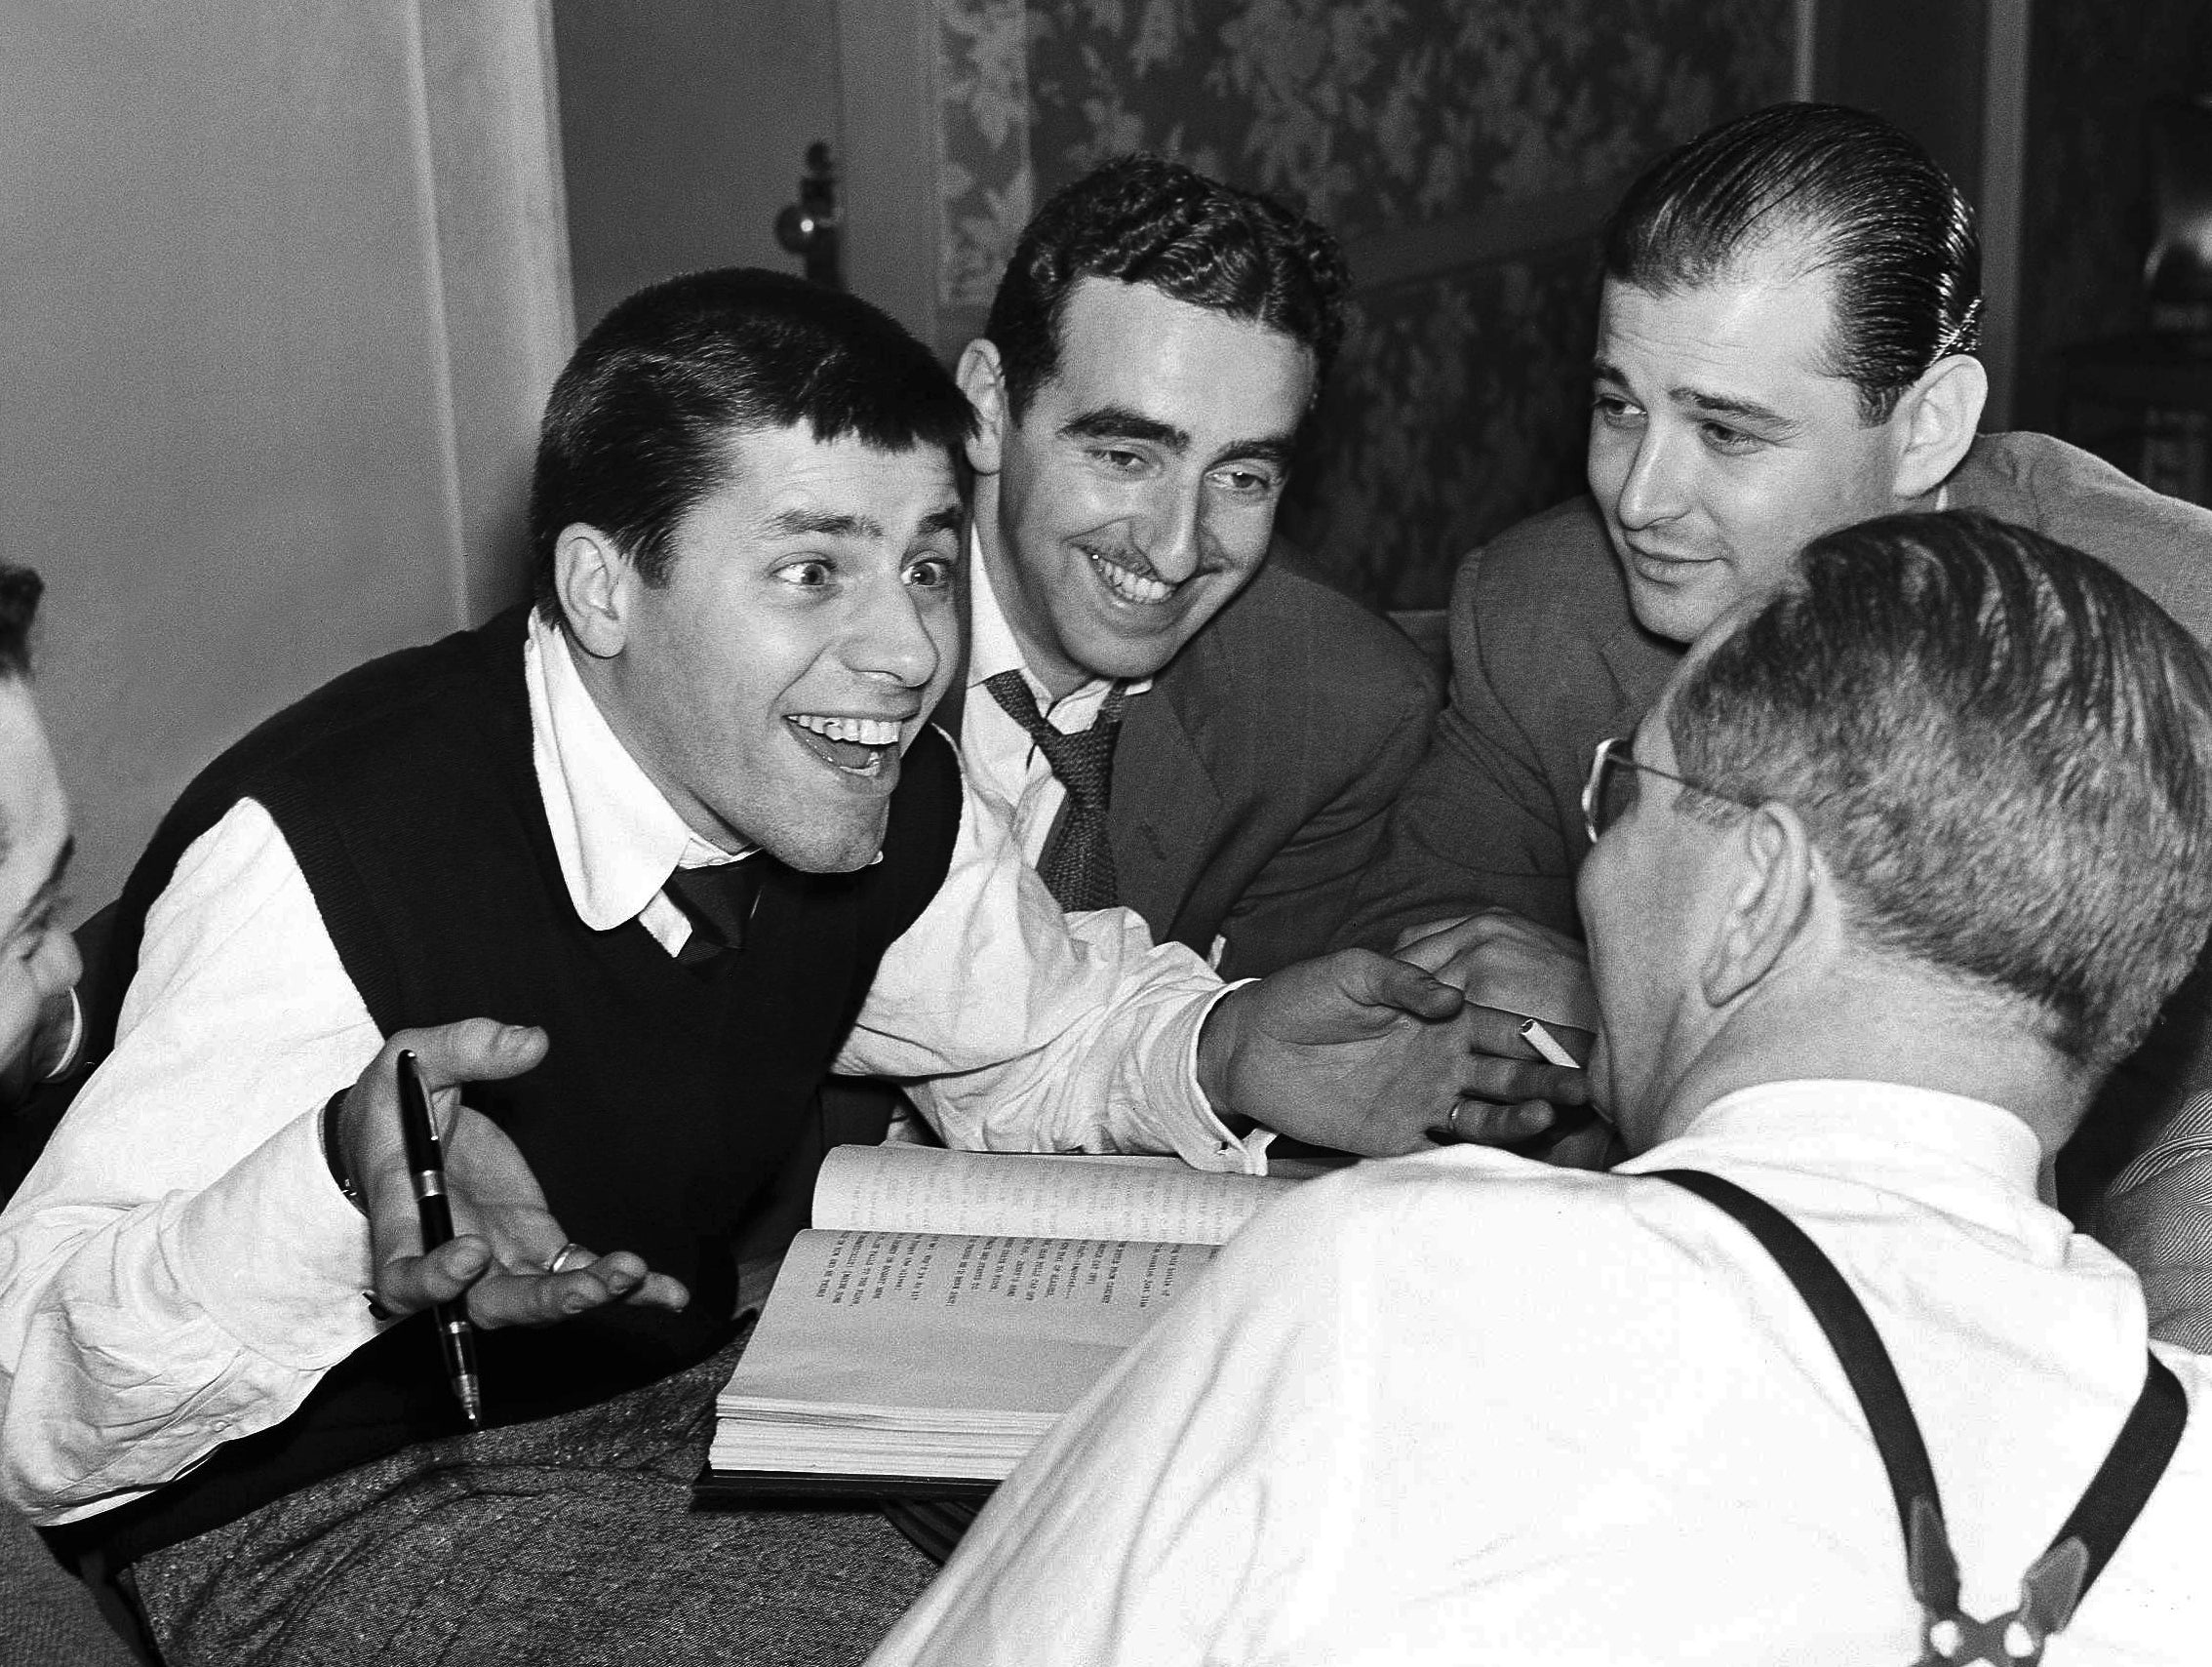 Comedian Jerry Lewis, left, meets with Ed Simmons, center, writer Norman Lear, background right, and producer Ernie Glucksman. 